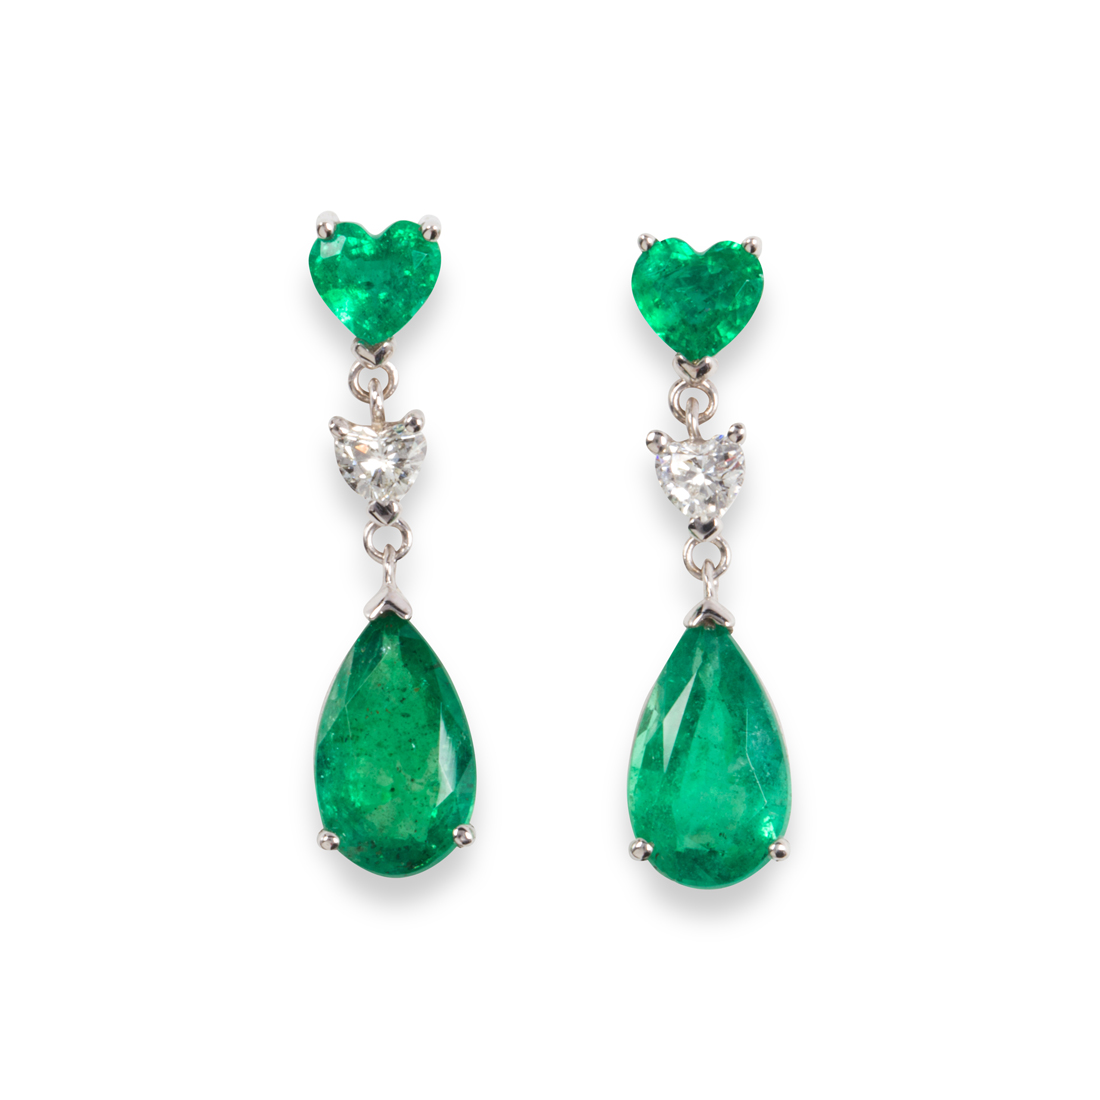 A PAIR OF EMERALD DIAMOND AND 3a2abb